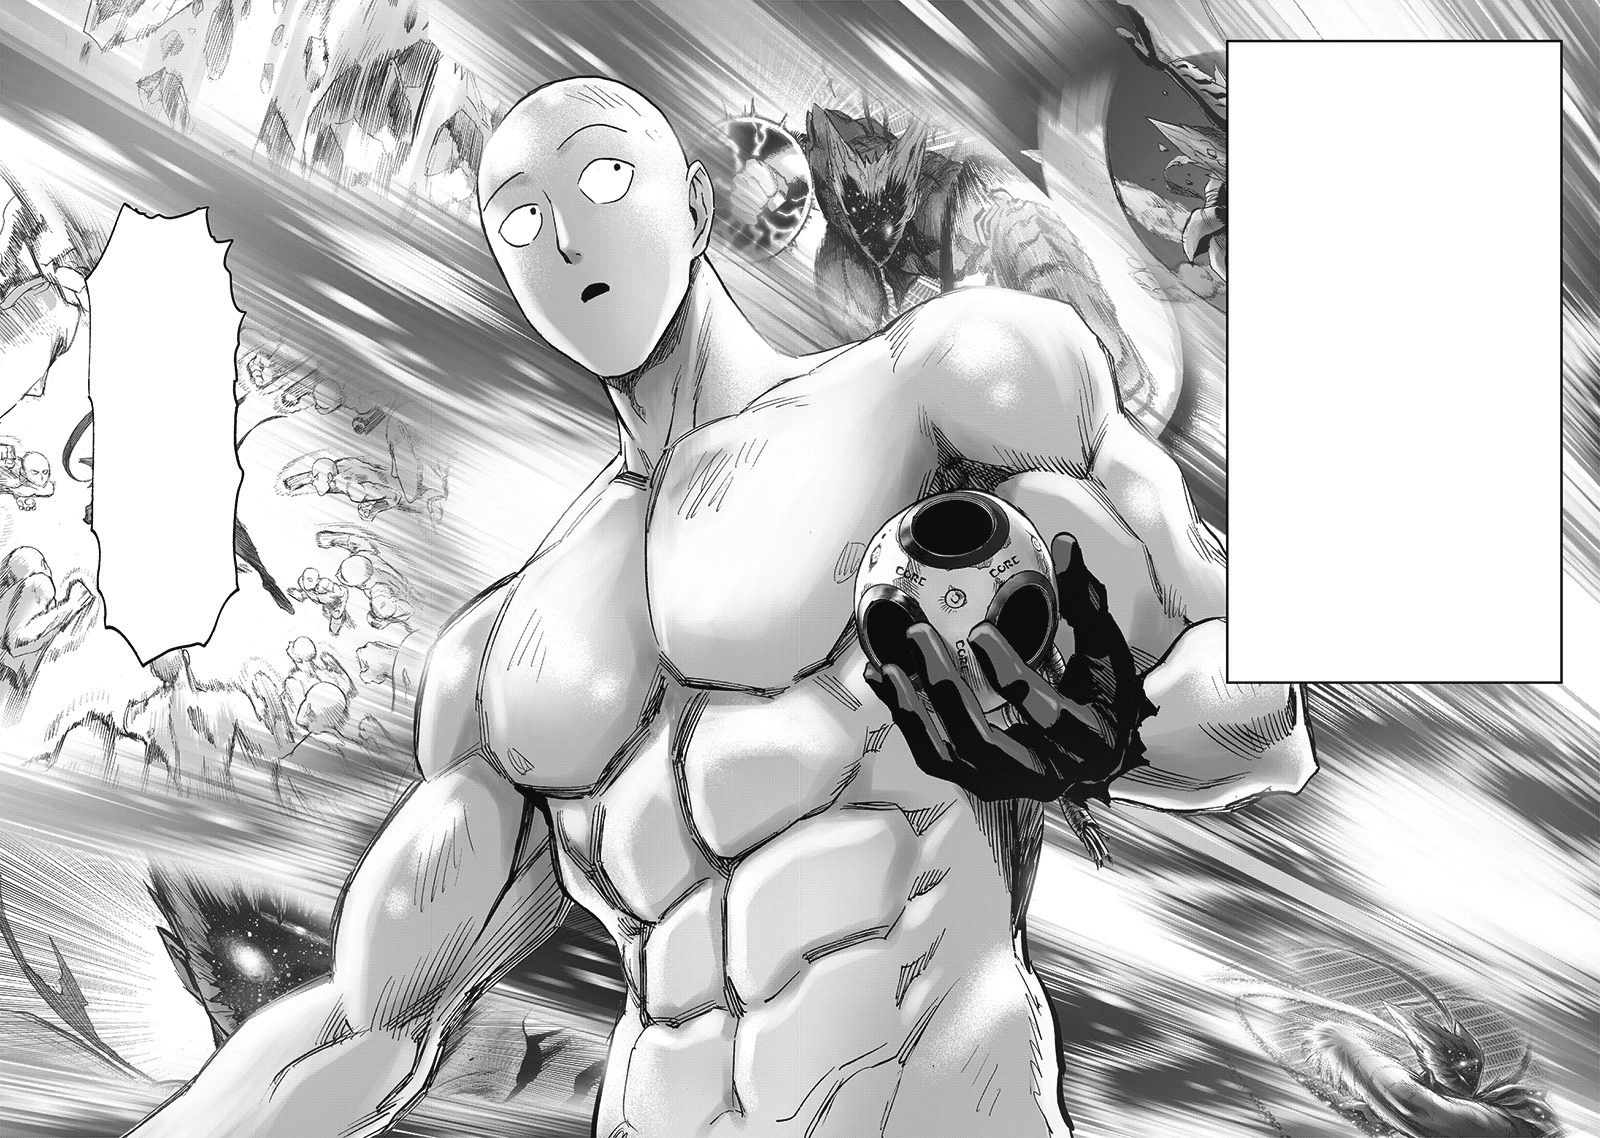 Calamity In One Punch Man World